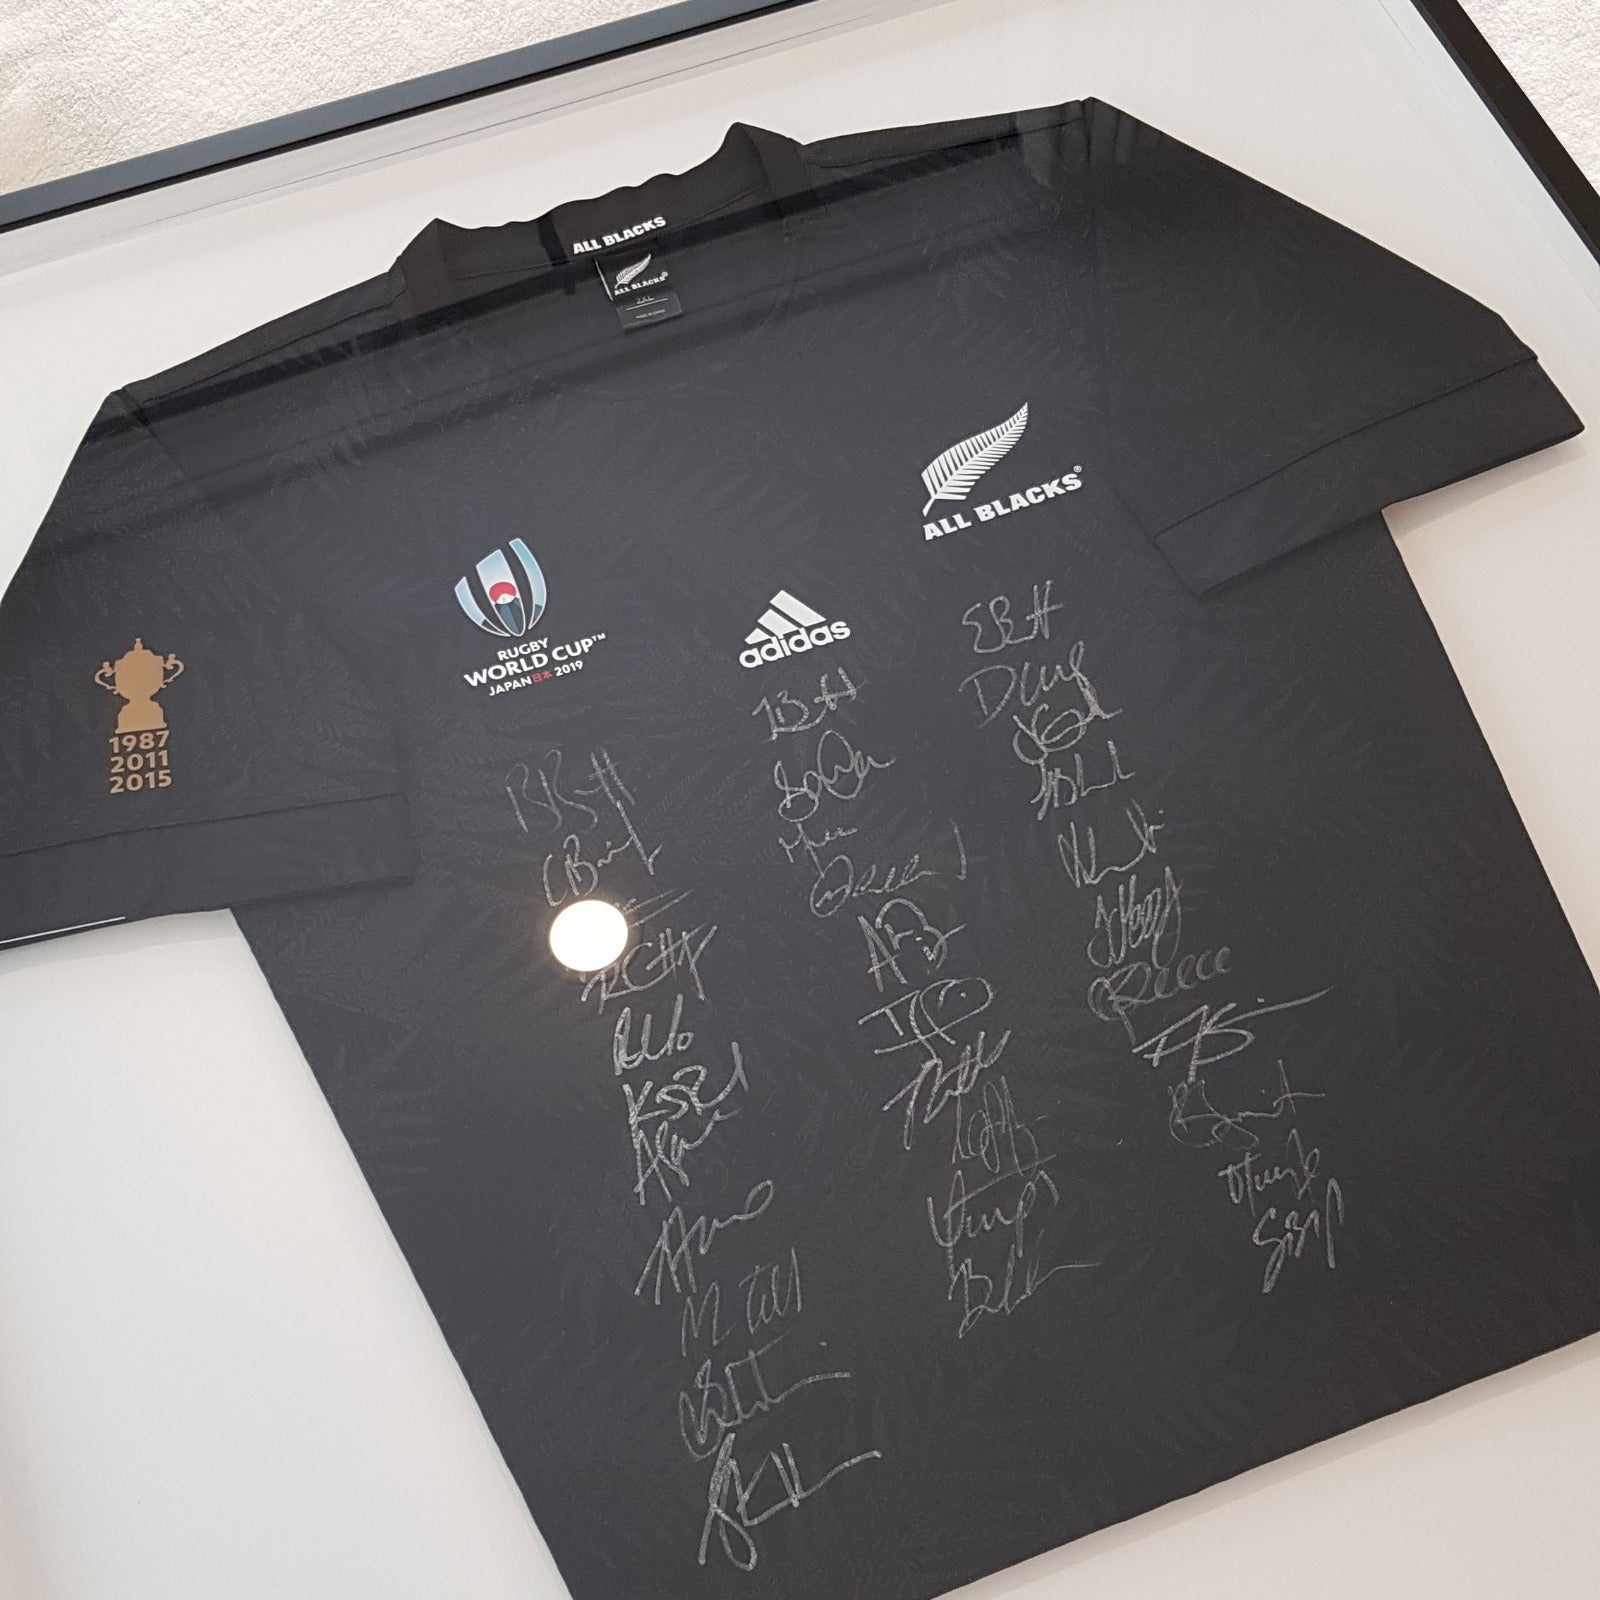 all black, rugby jersey, rugby world cup, 1987, 2011, 2015, japan 2019, adidas, 